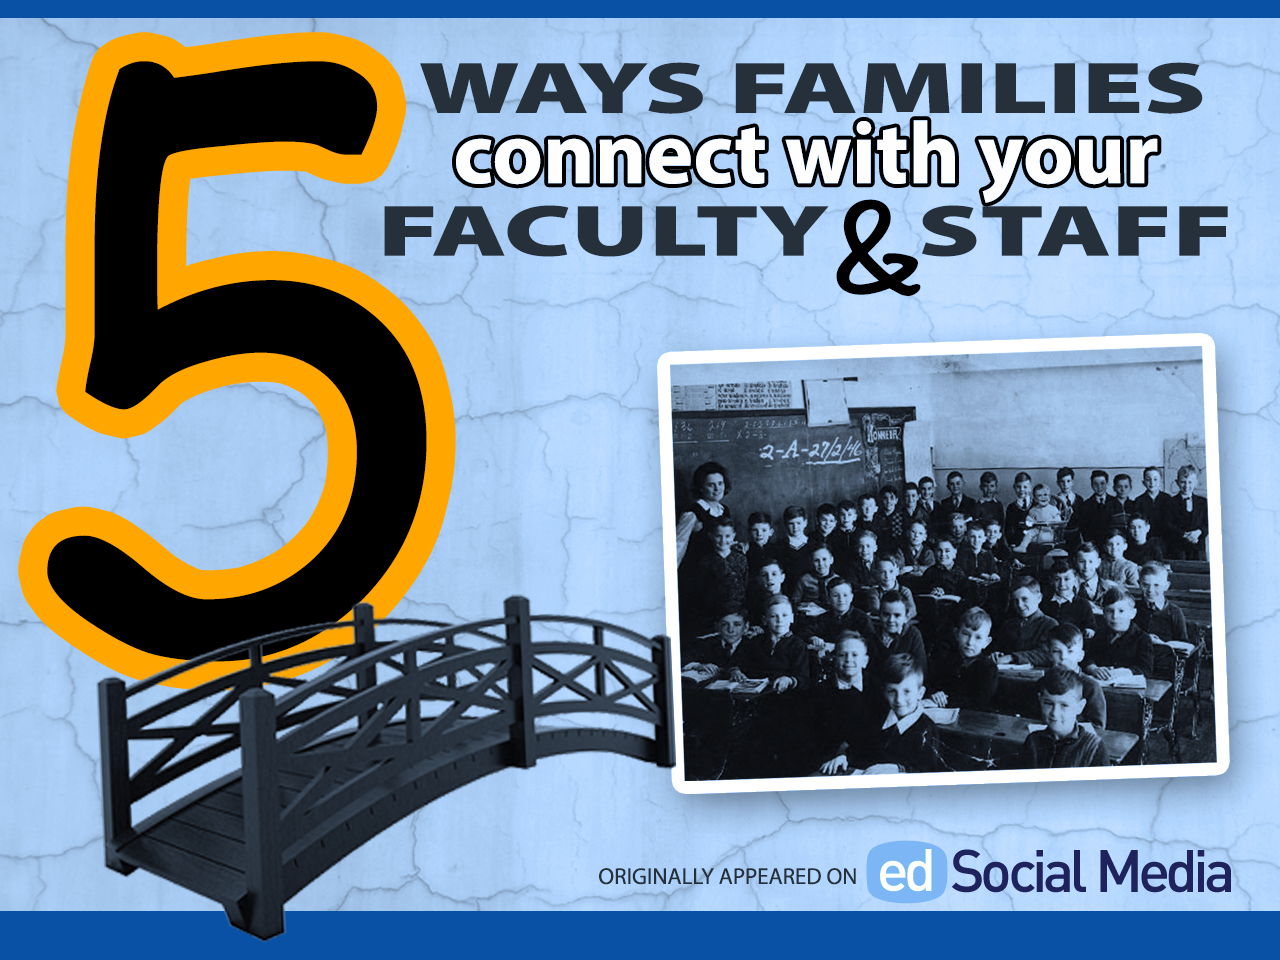 5 Ways Families Connect with Your Faculty & Staff - by Randy Vaughn, edSocialMedia Contributor